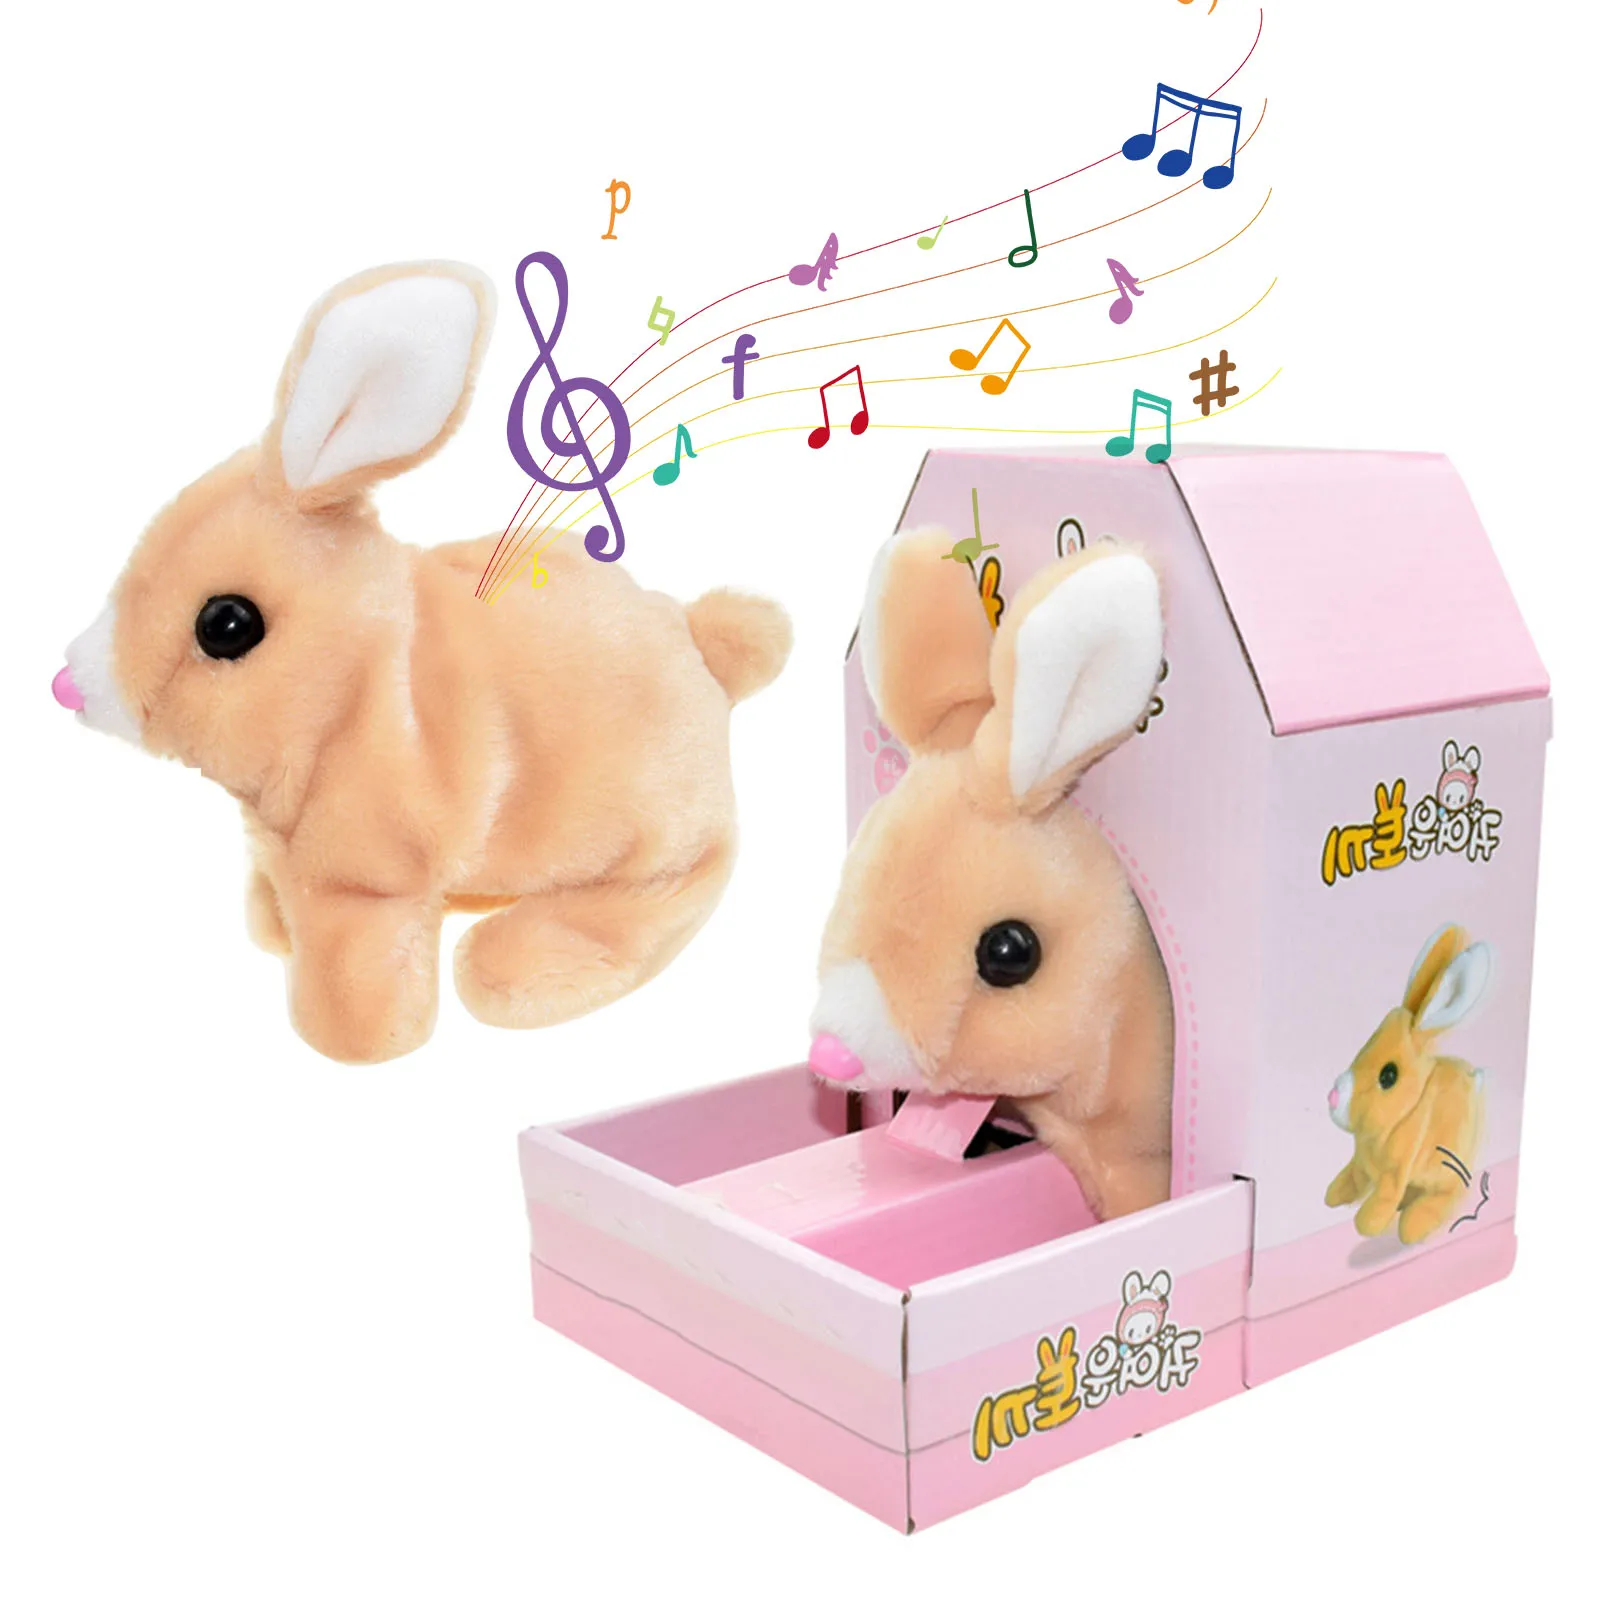 

Educational Interactive Toys Can Walk And Talk Electric Plush Toy With Sound And Movements Realistic Toy Rabbits That Act Real